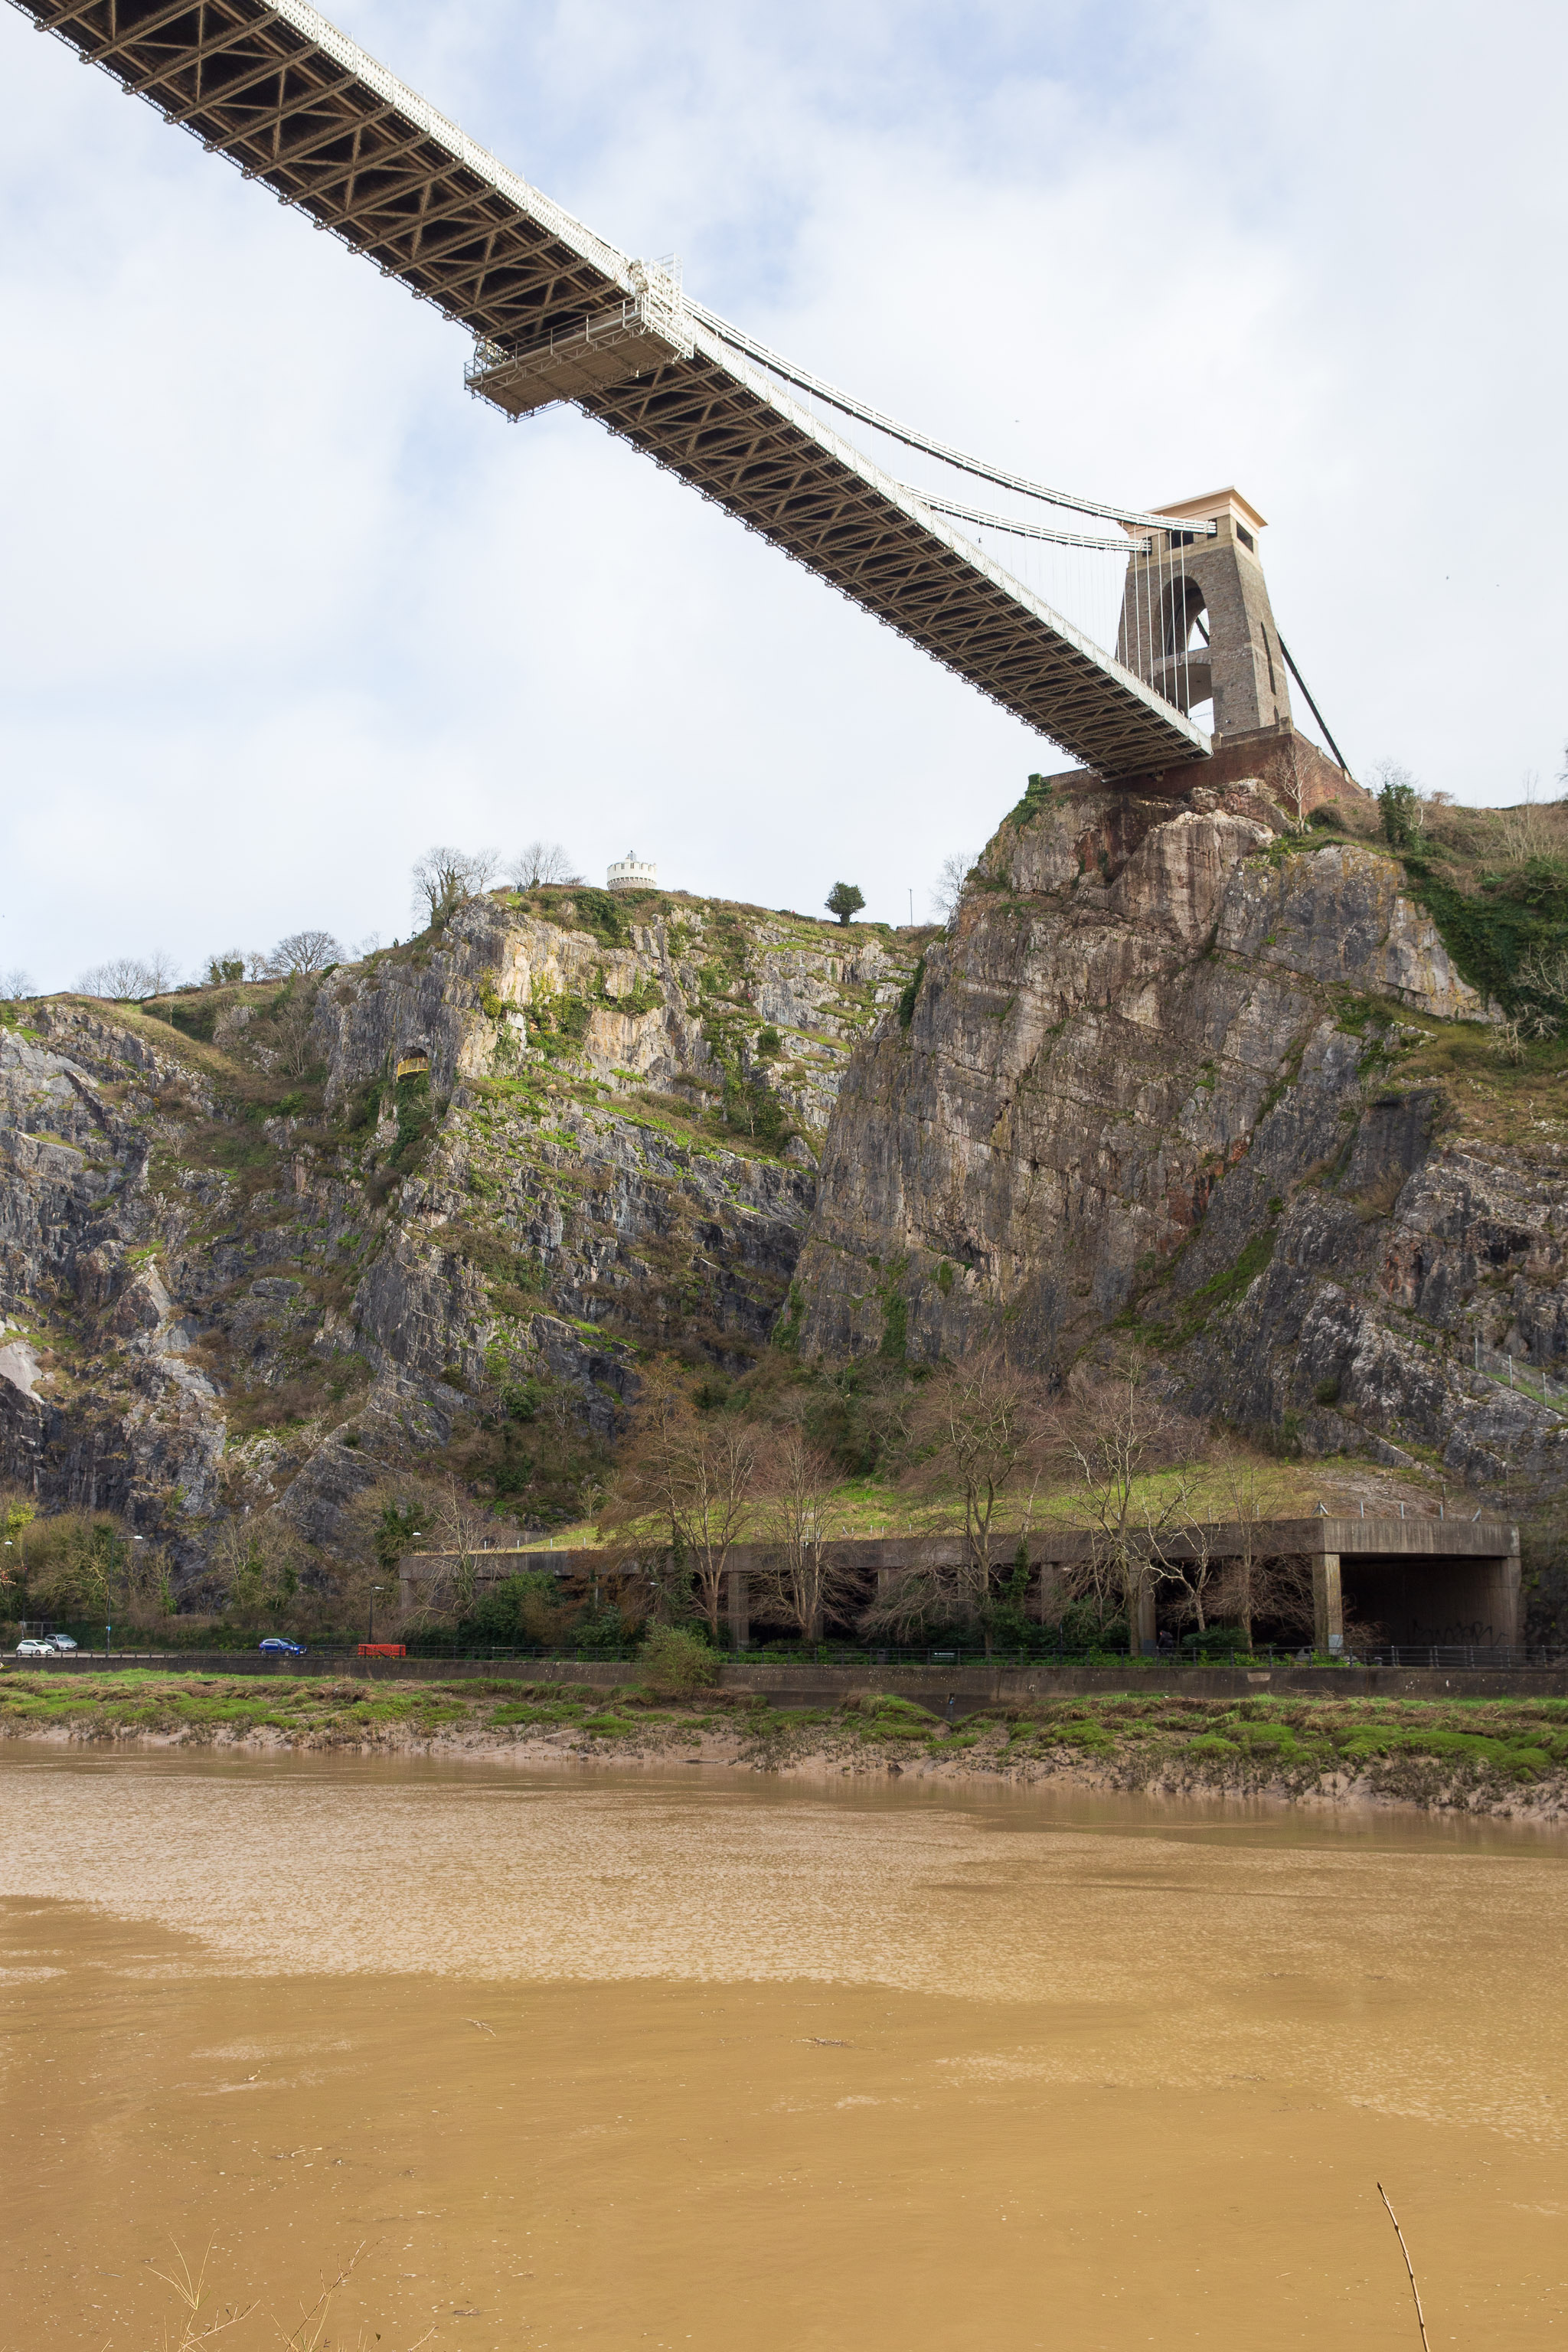 Formerly...
The roofed area below the Suspension Bridge is called The Gallery; it's there to prevent rocks from the particularly friable cliff face below the b...